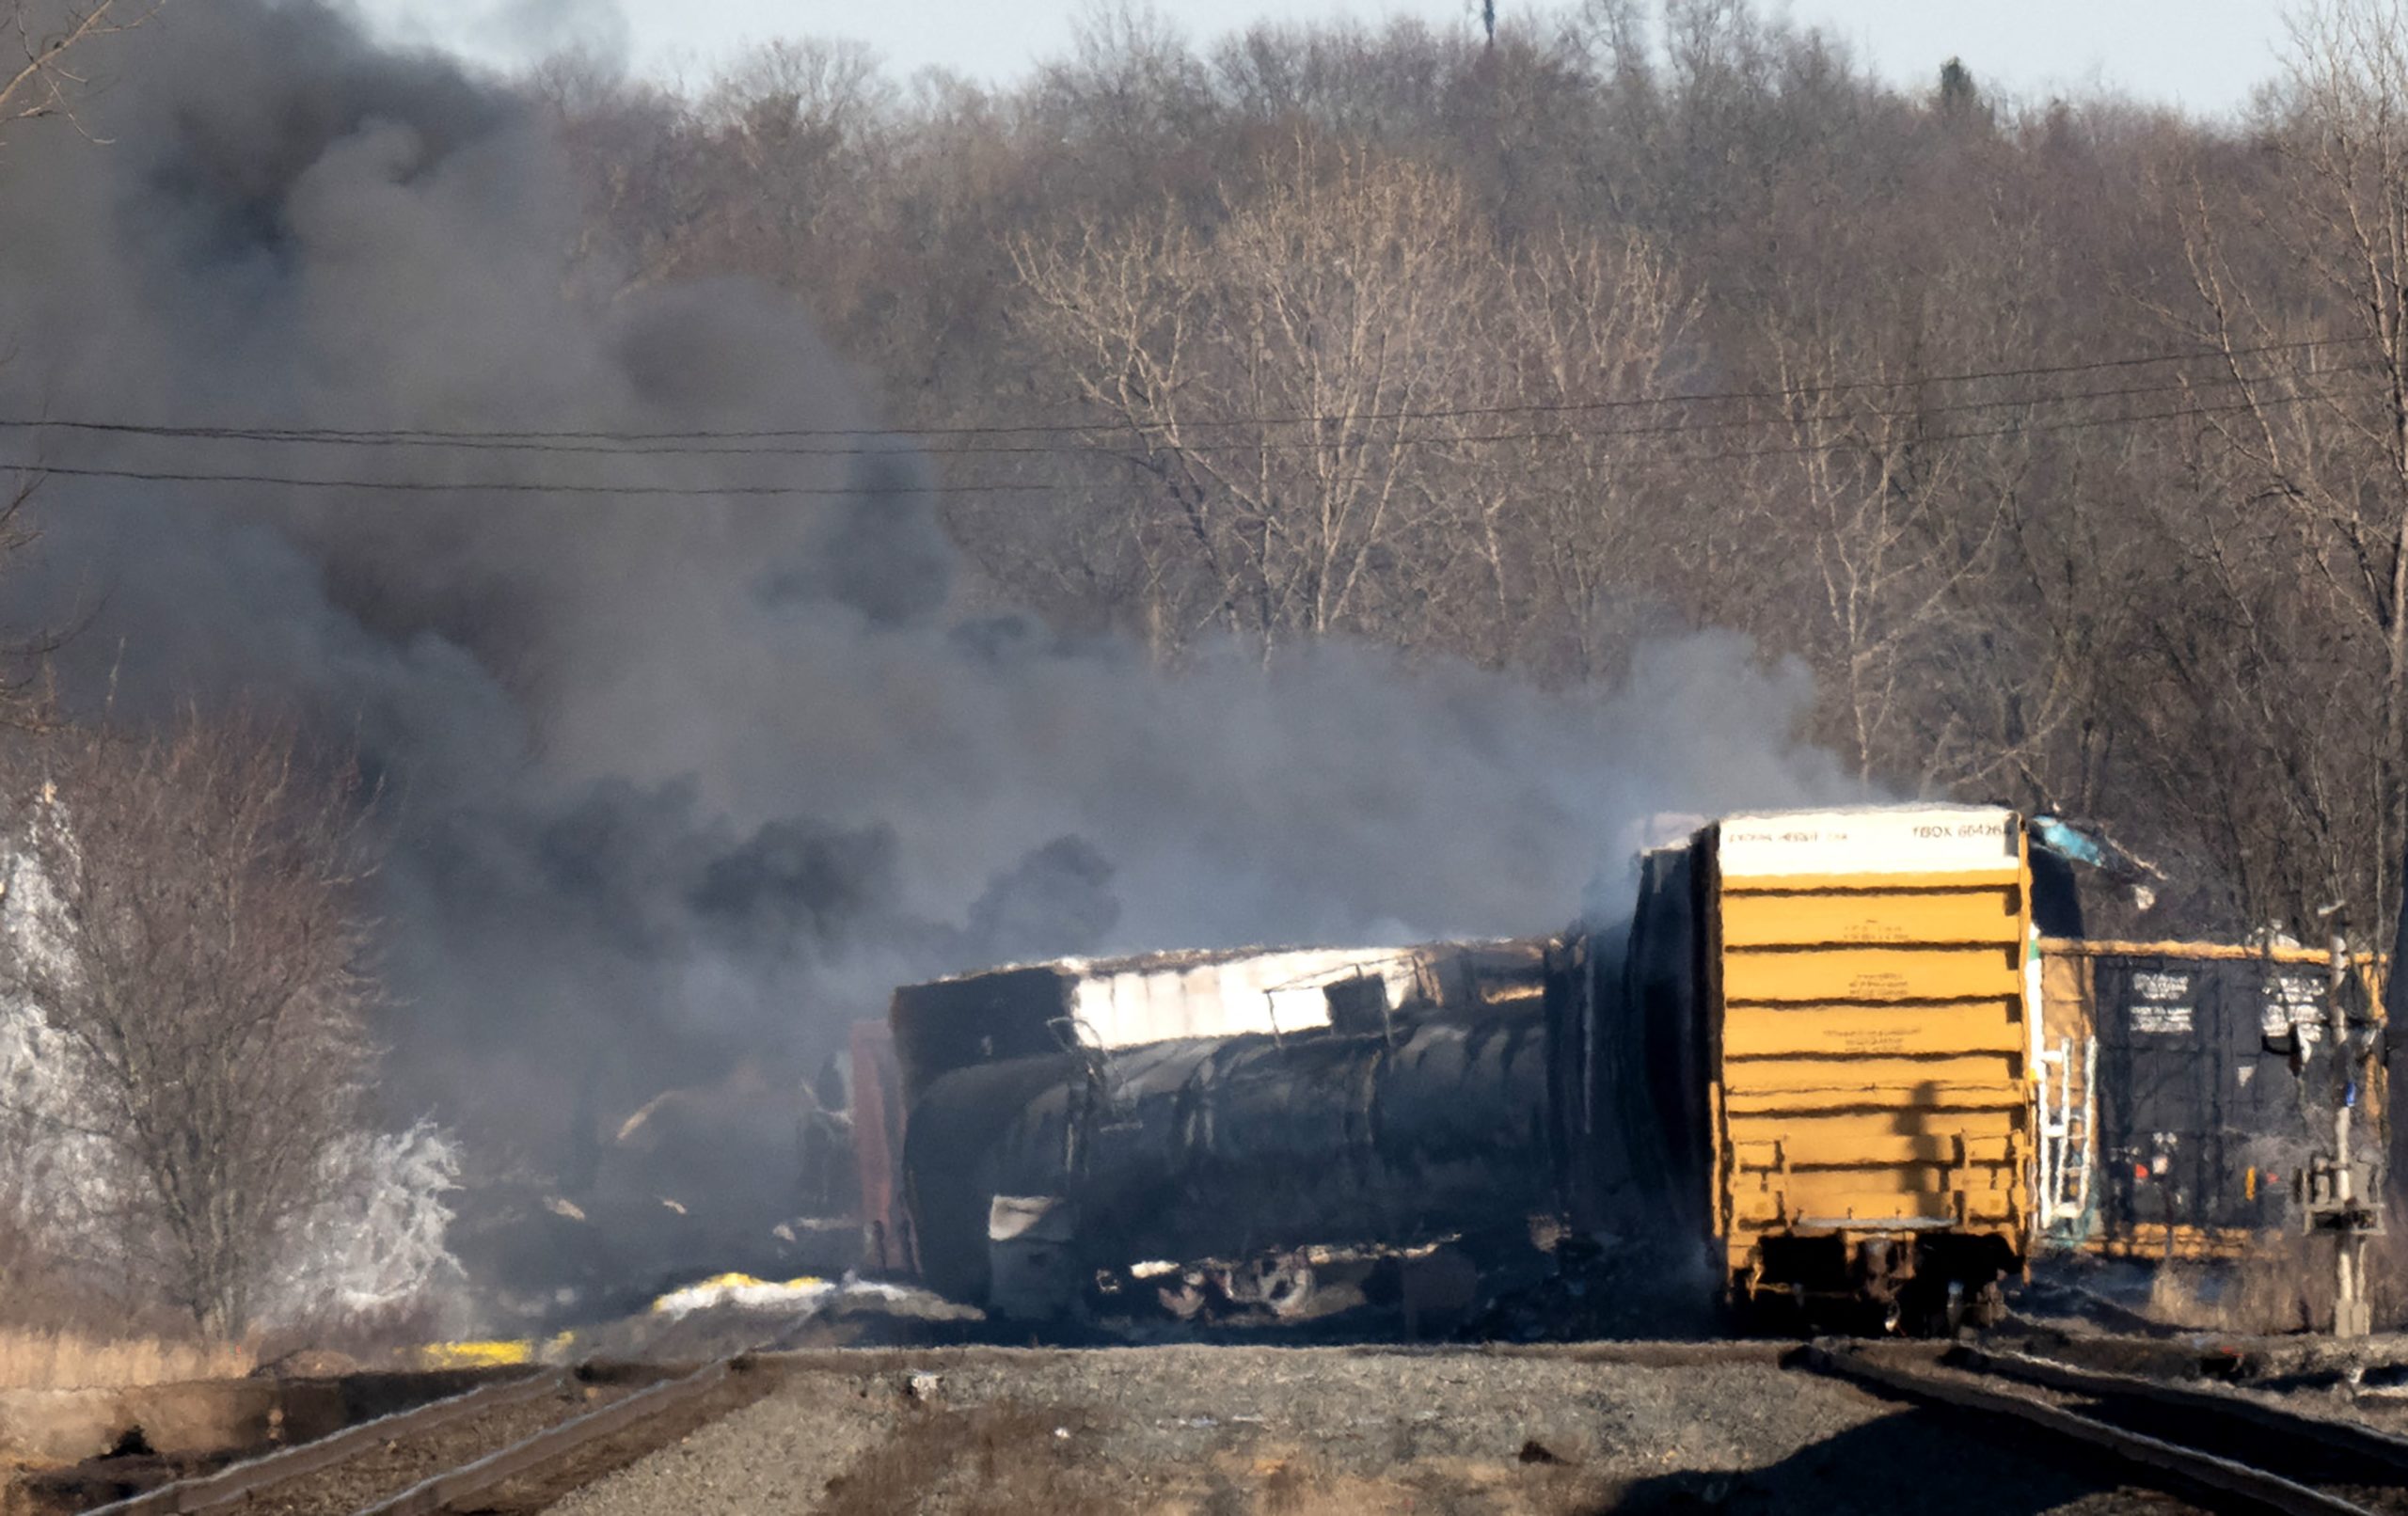 Smoke rises from a derailed cargo train in East Palestine, Ohio, on February 4, 2023.